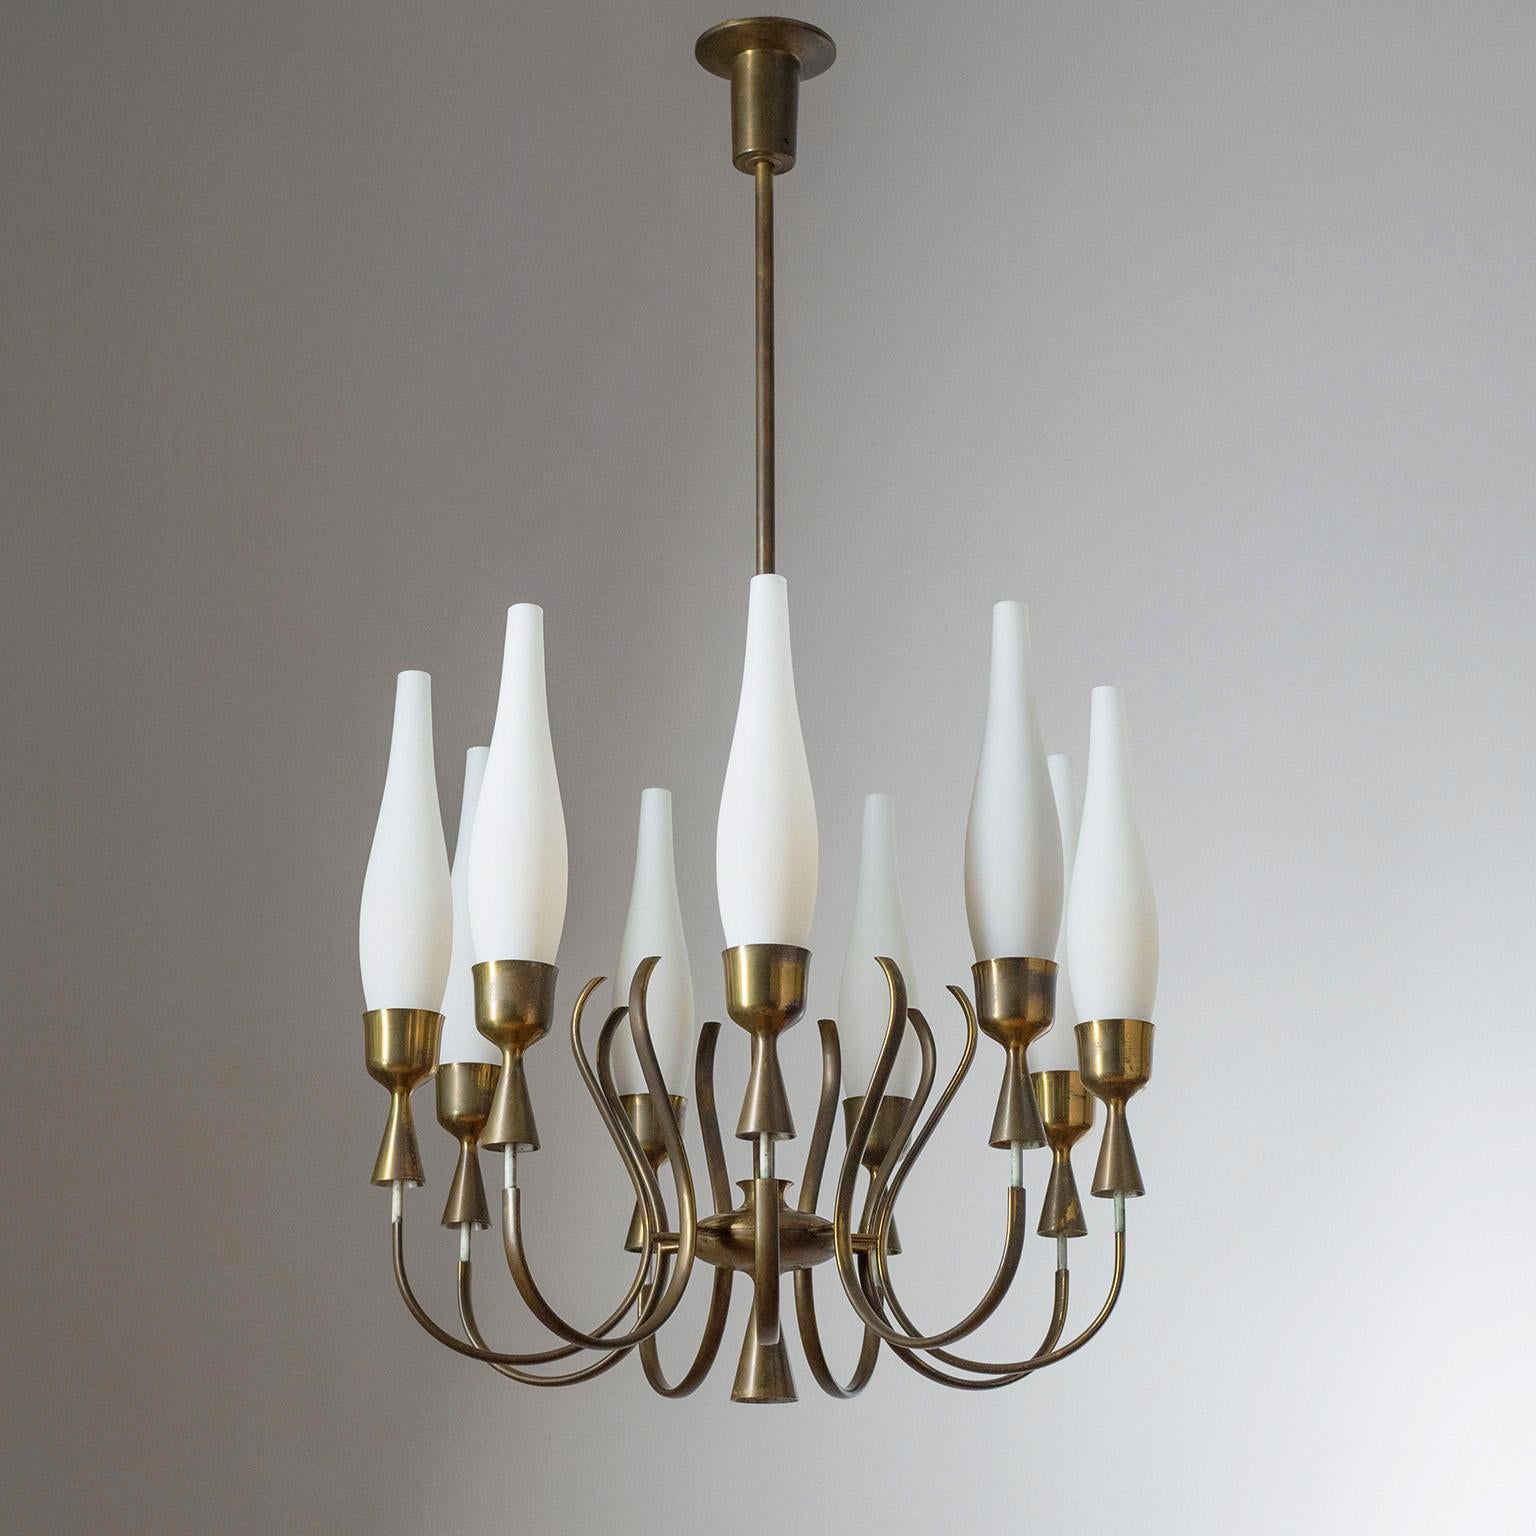 Rare nine-arm brass chandelier by Angelo Lelii for Arredoluce, 1957. Exquisitely curved arms with seemingly floating socket covers and slender satin glass diffusers. Dark patina on the brass and off-white lacquered elements.
Literature: